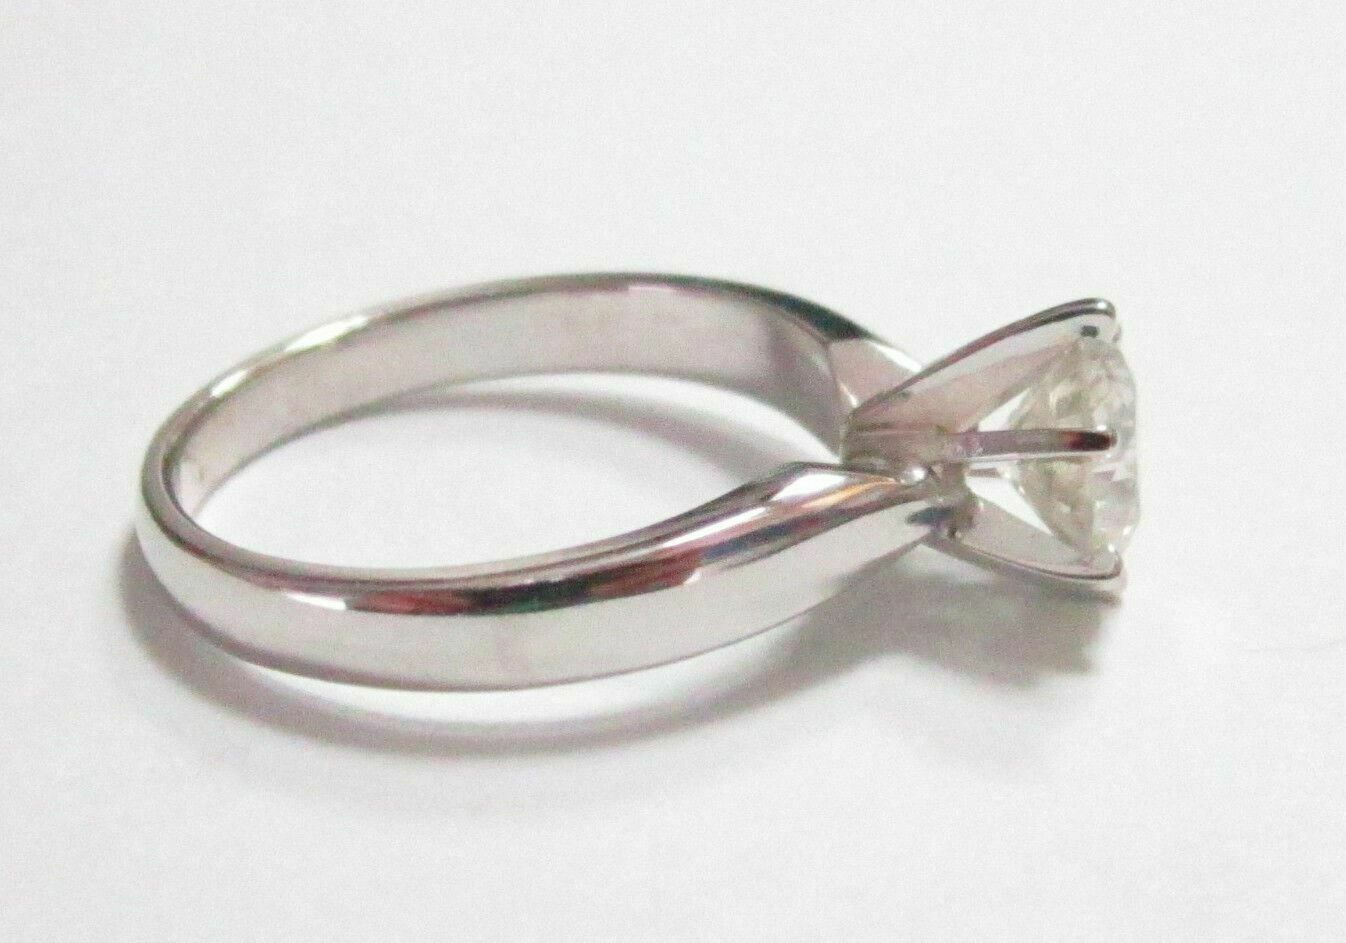 .88 TCW Round Cut Diamond Solitaire Engagement Ring Size 5.5 G I1 14k White Gold